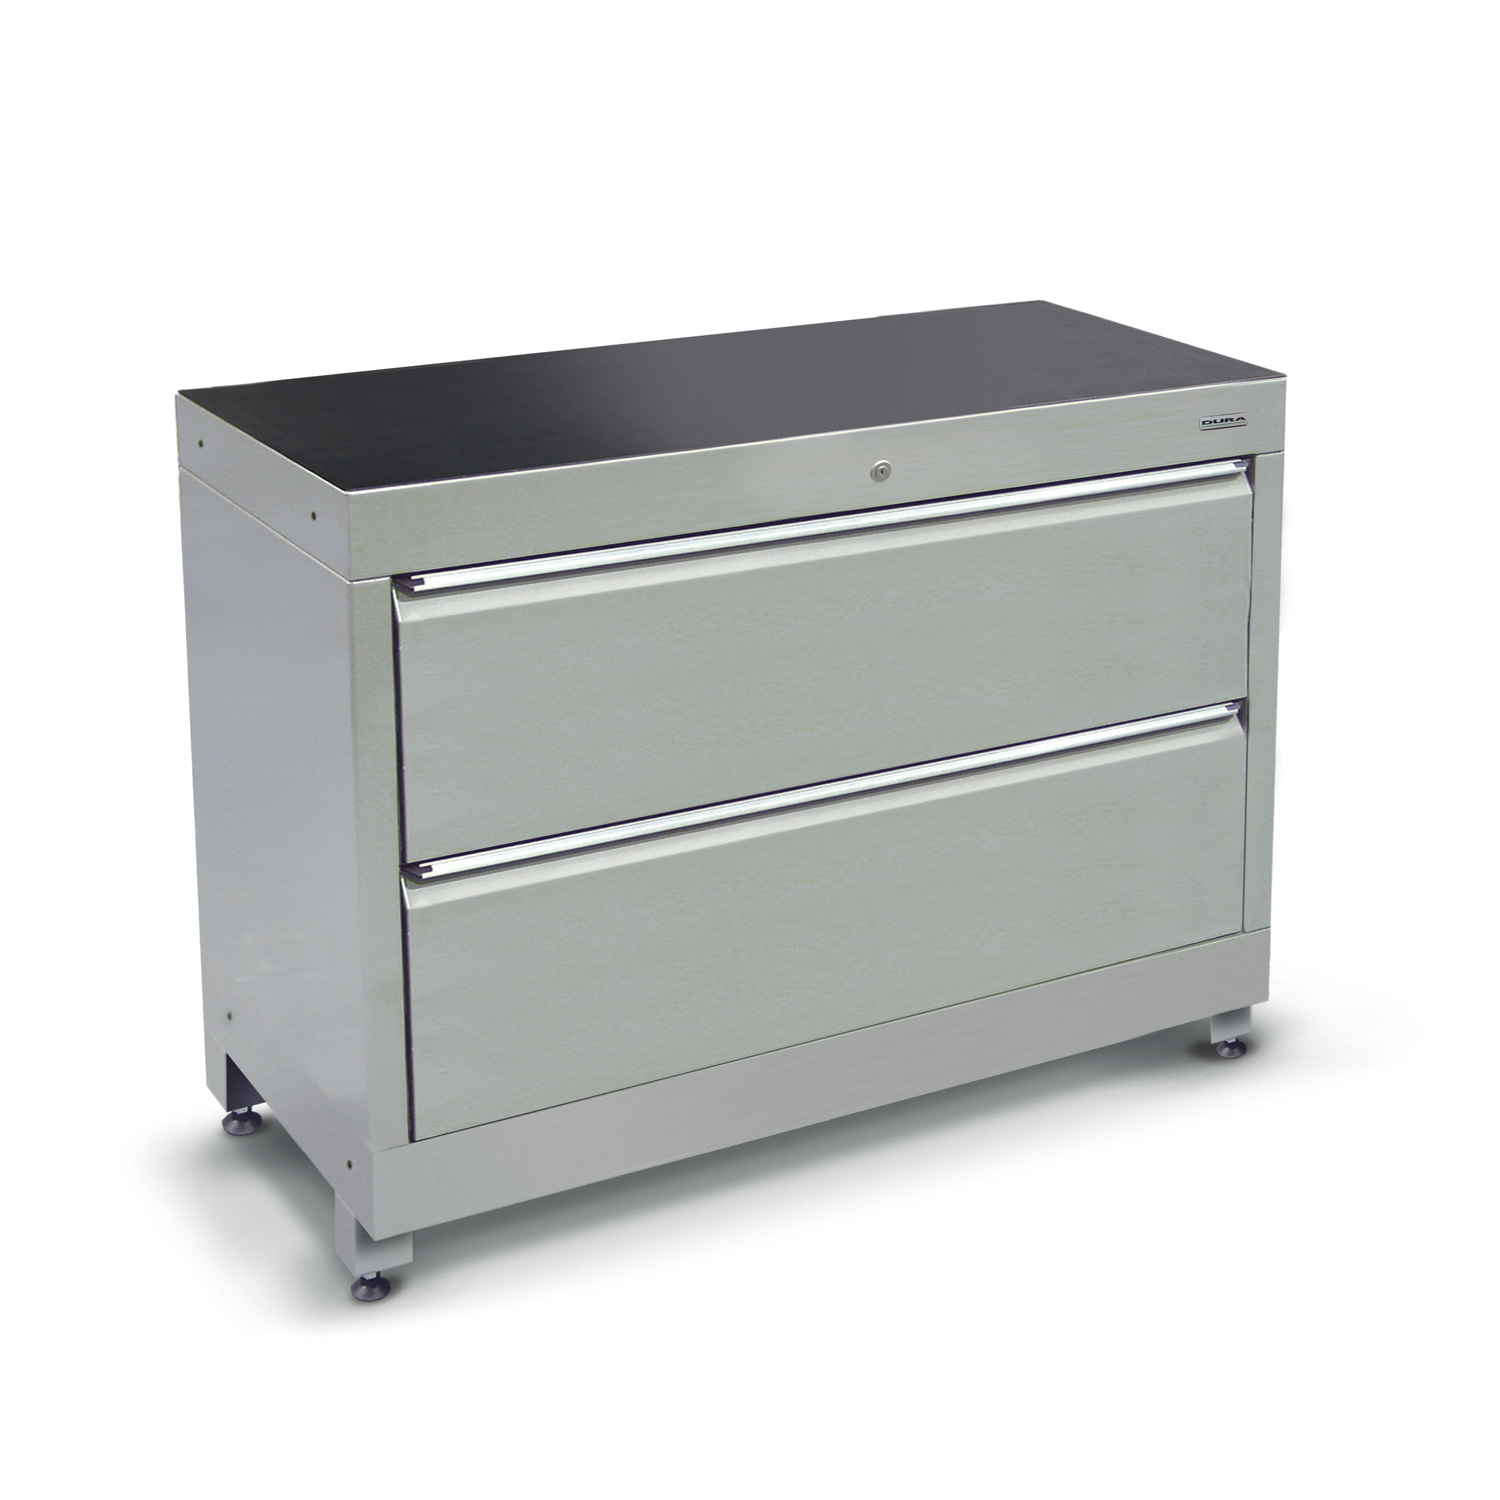 1200 series tool cabinet with an additional inner sliding tray (2 drawers)